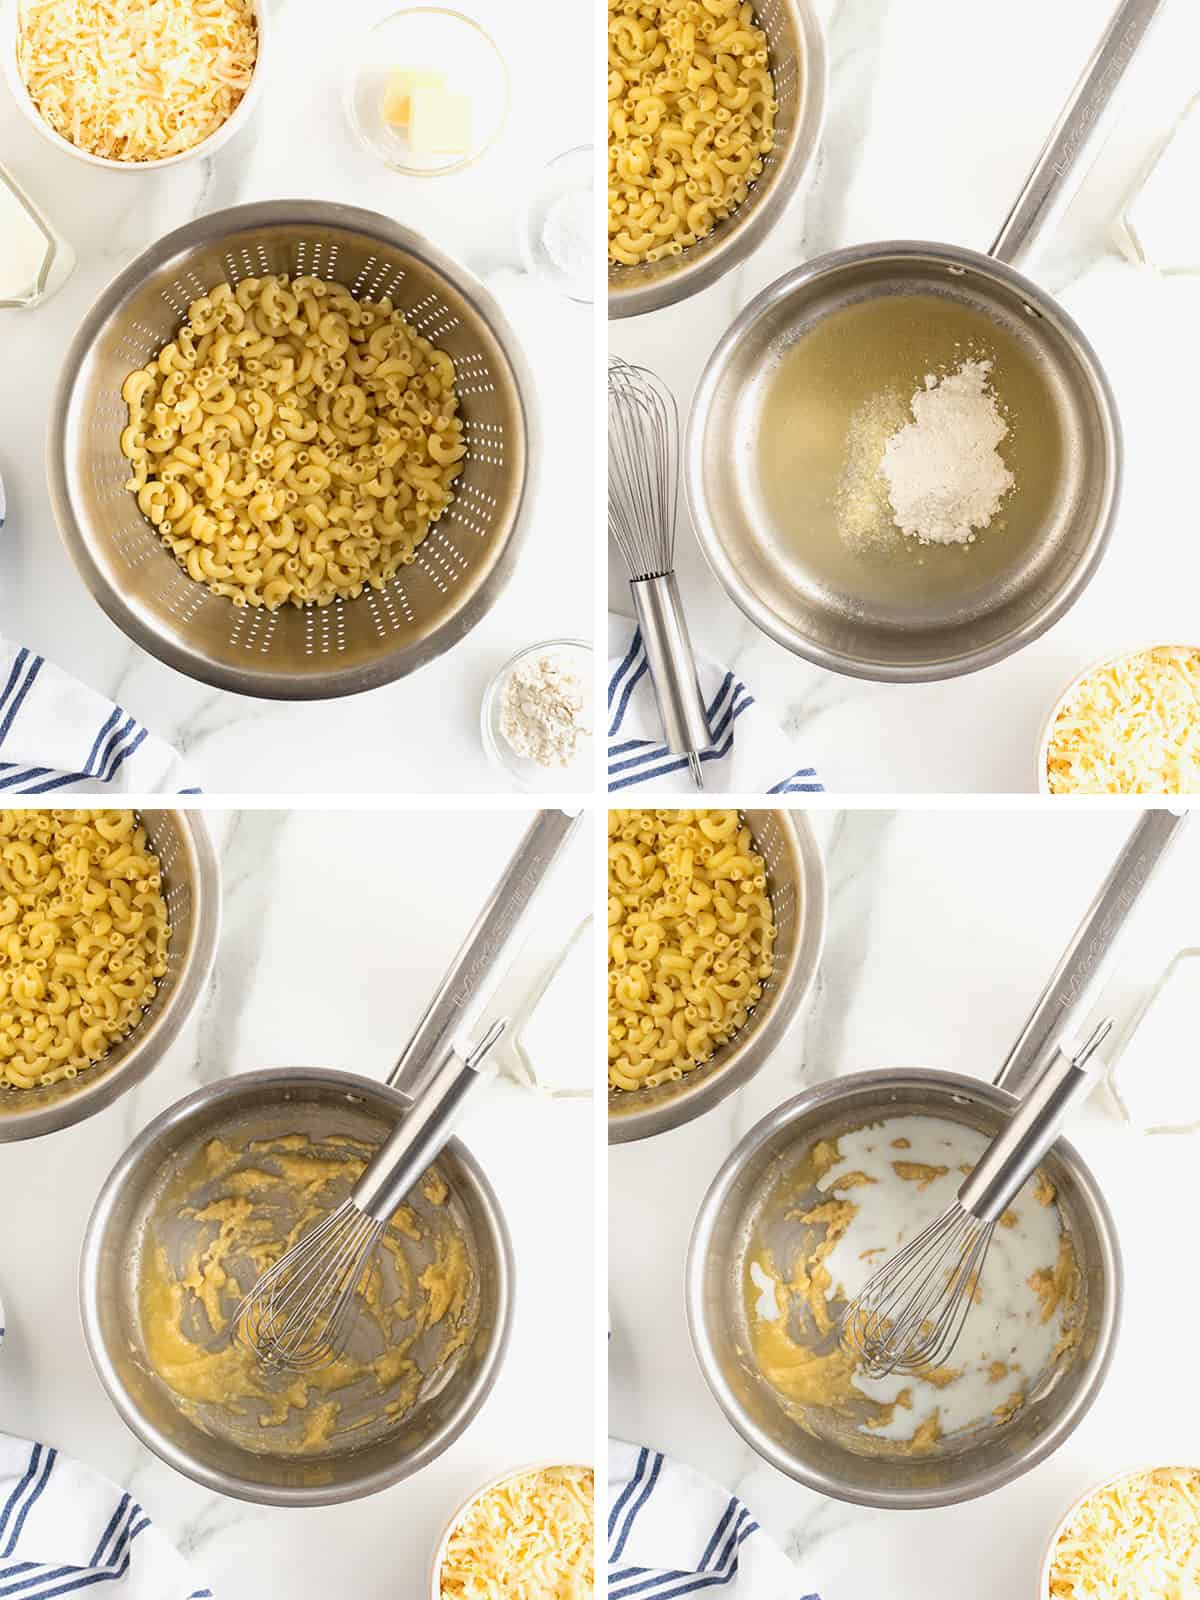 Steps to make muenster macaroni and cheese.